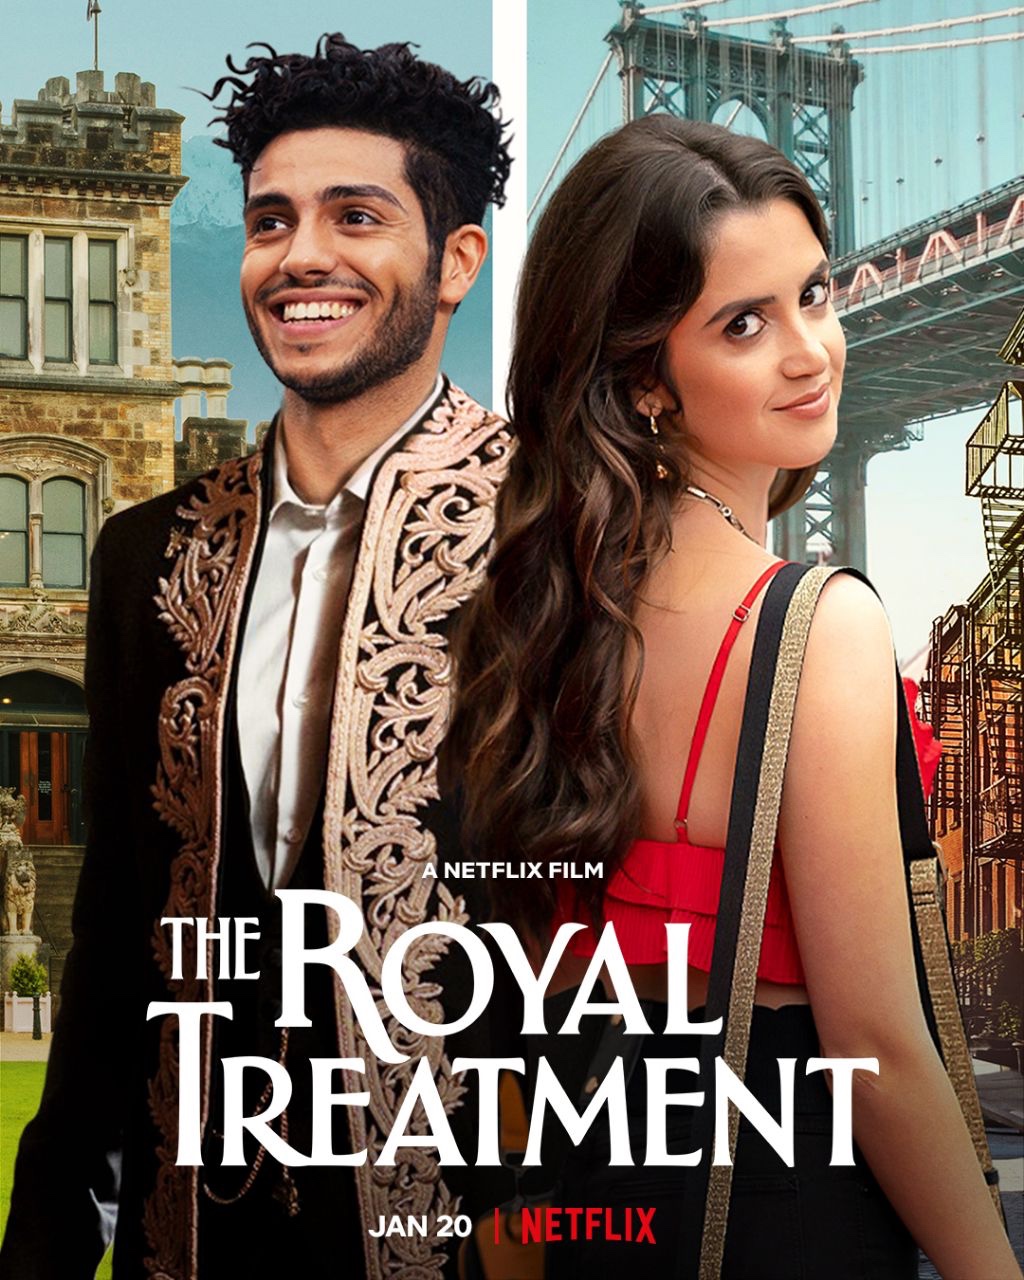 Film Review: The Royal Treatment